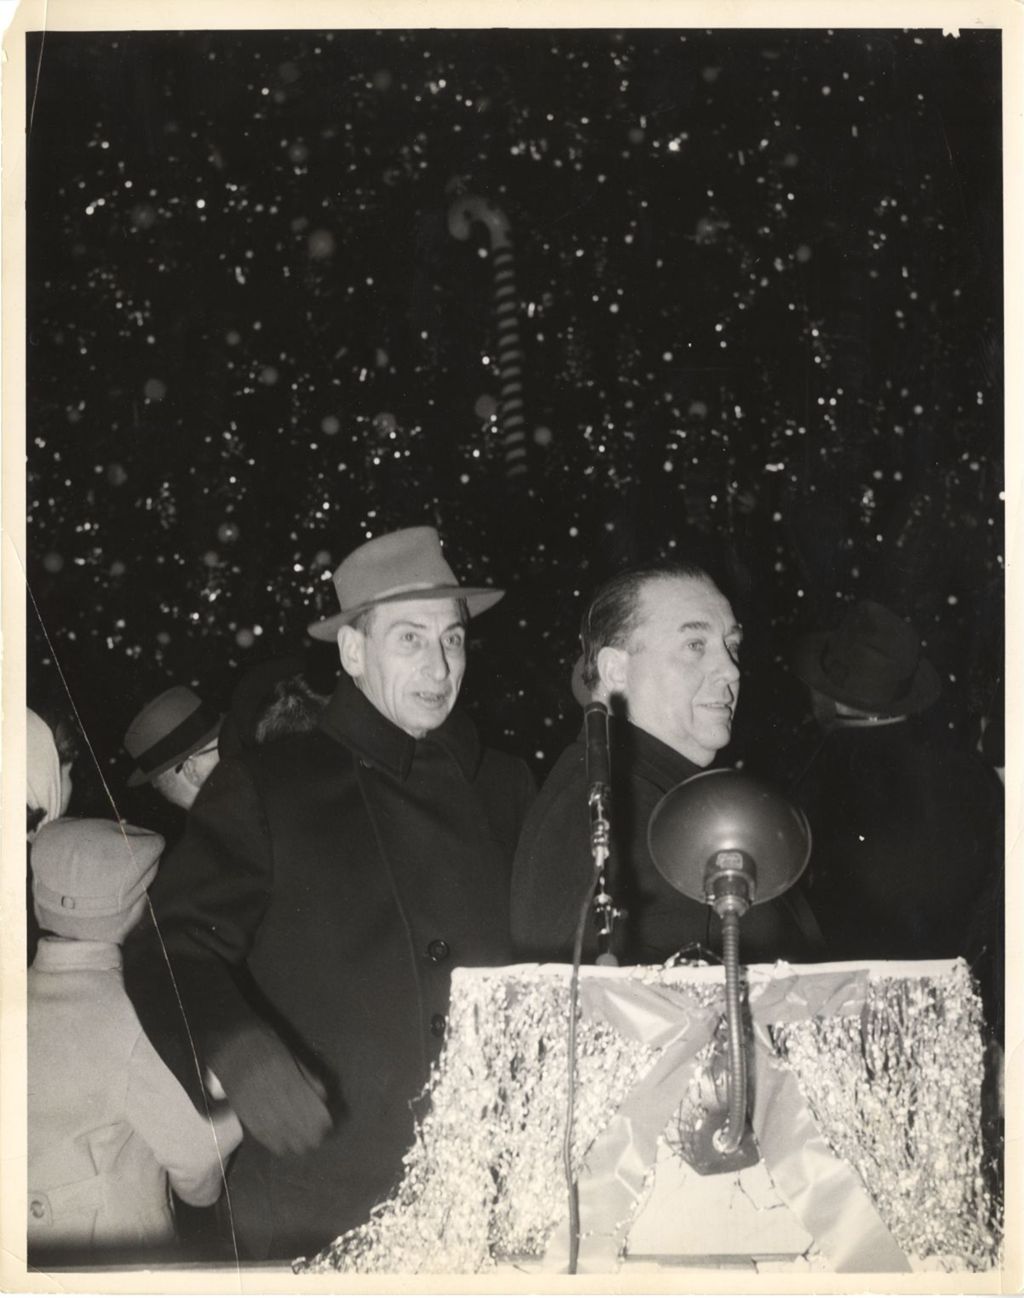 Miniature of Richard J. Daley outdoors at a holiday event